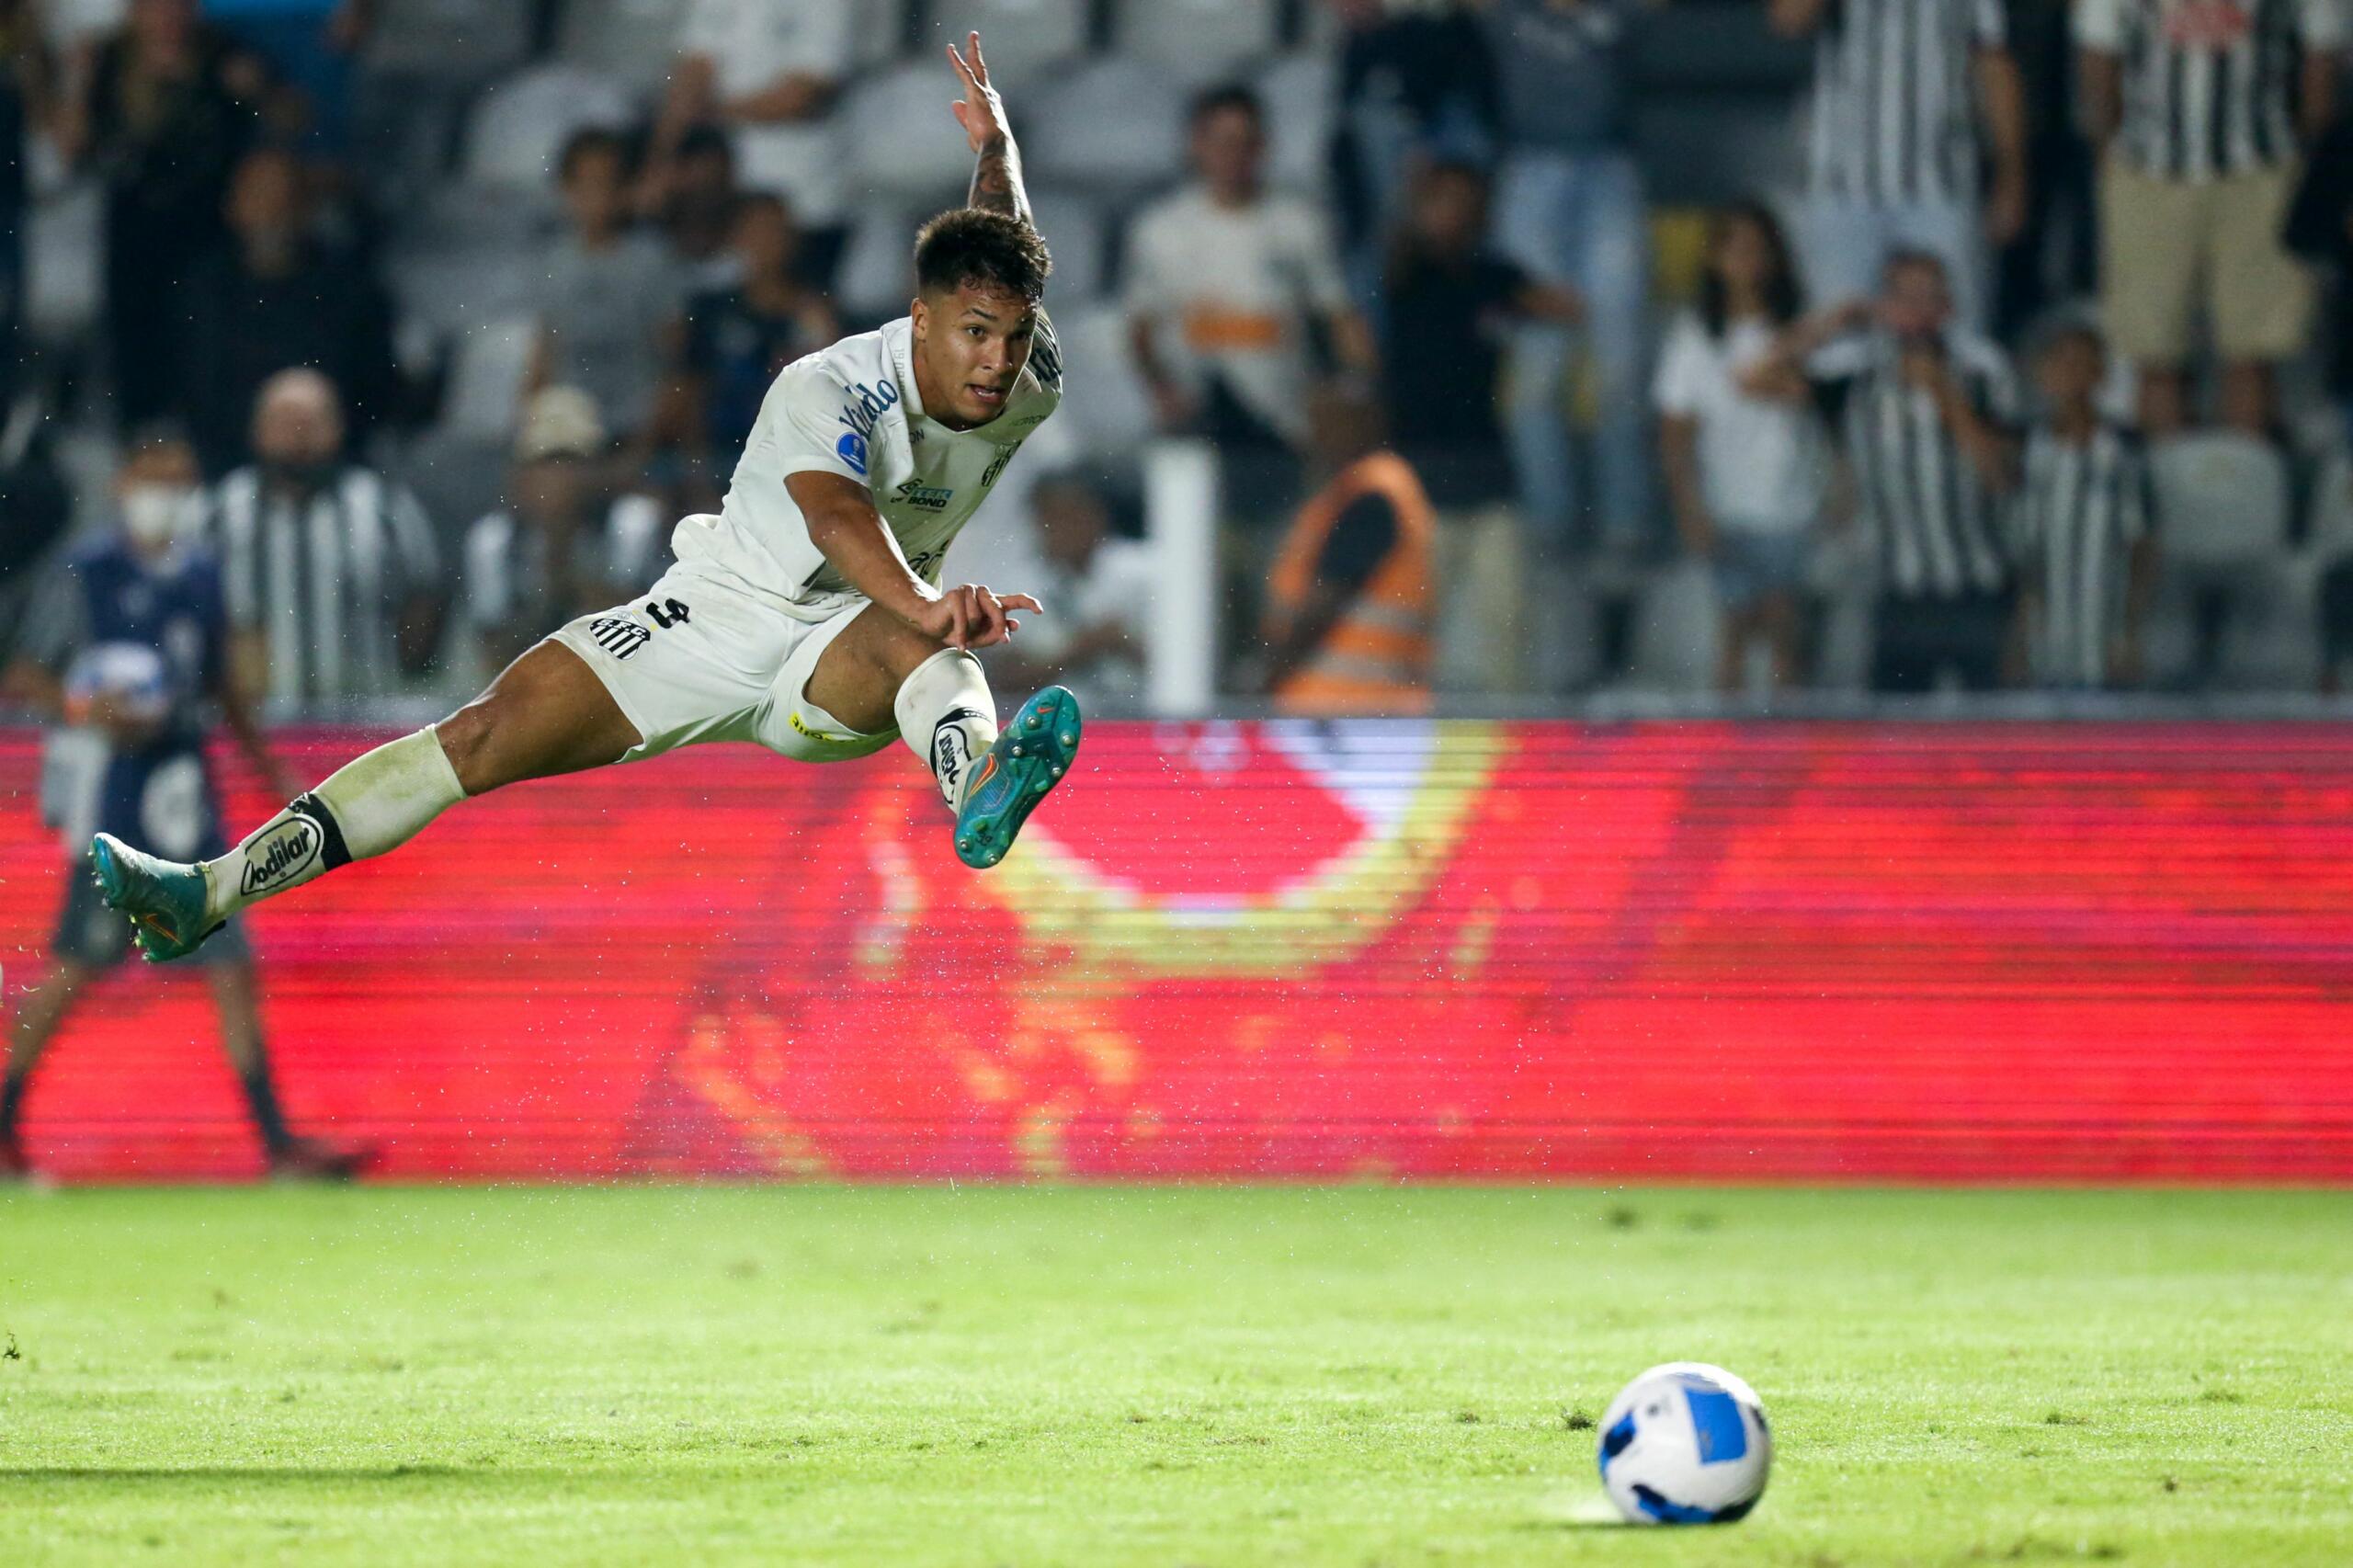 Santos general manager Gallo has backed Marcos Leonardo to leave in the next transfer window, after Roma failed to come an agreement over the summer.